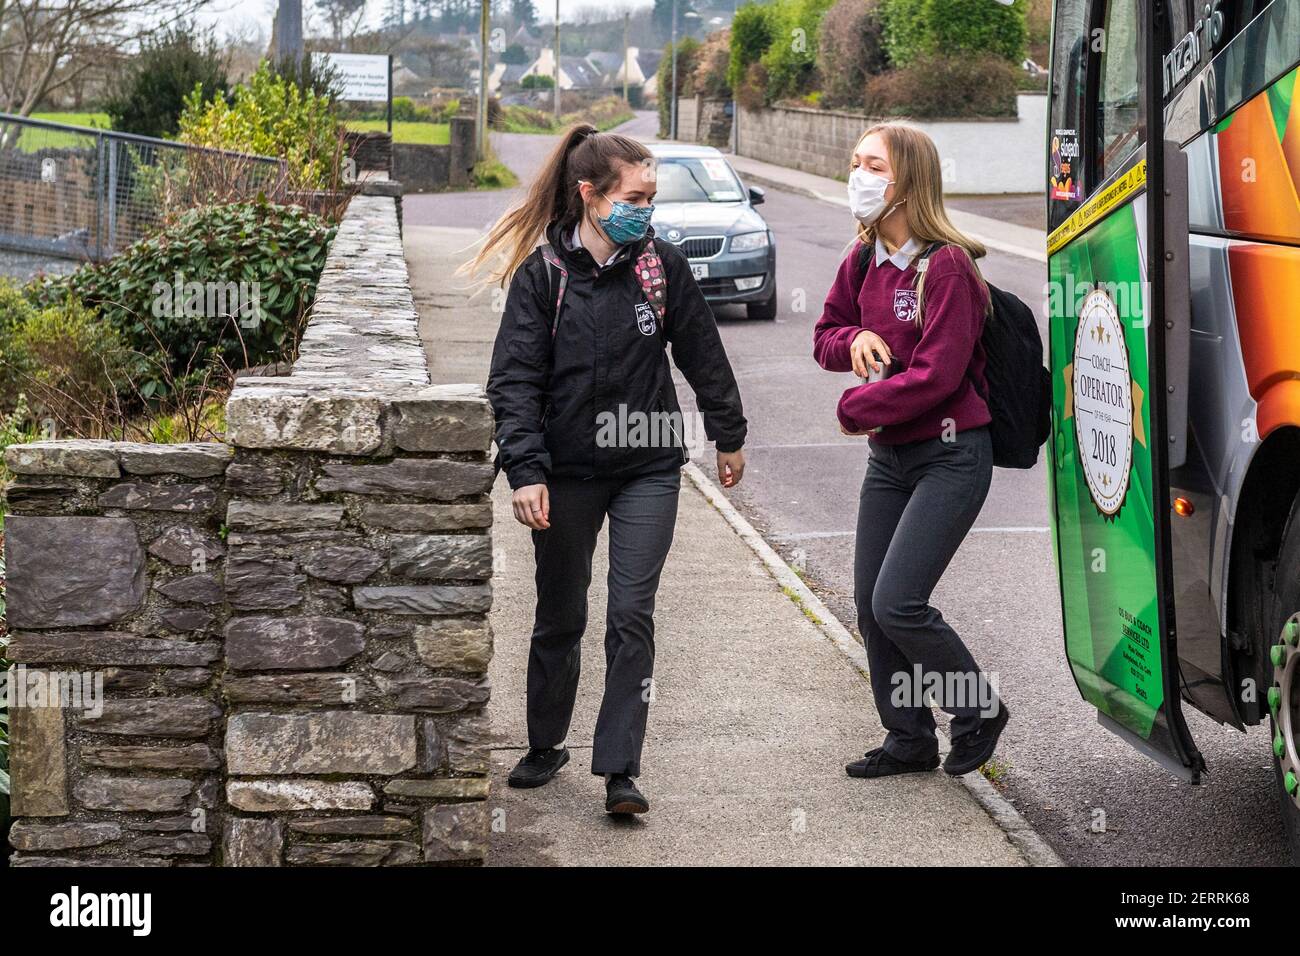 Schull, West Cork, Ireland. 1st Mar, 2021. Over 320,000 Primary and Leaving Cert pupils went back to school today. Schools have been closed since 23rd December. Schull Community College Leaving Cert pupils started arriving at the school from 8.30am. Credit: AG News/Alamy Live News Stock Photo